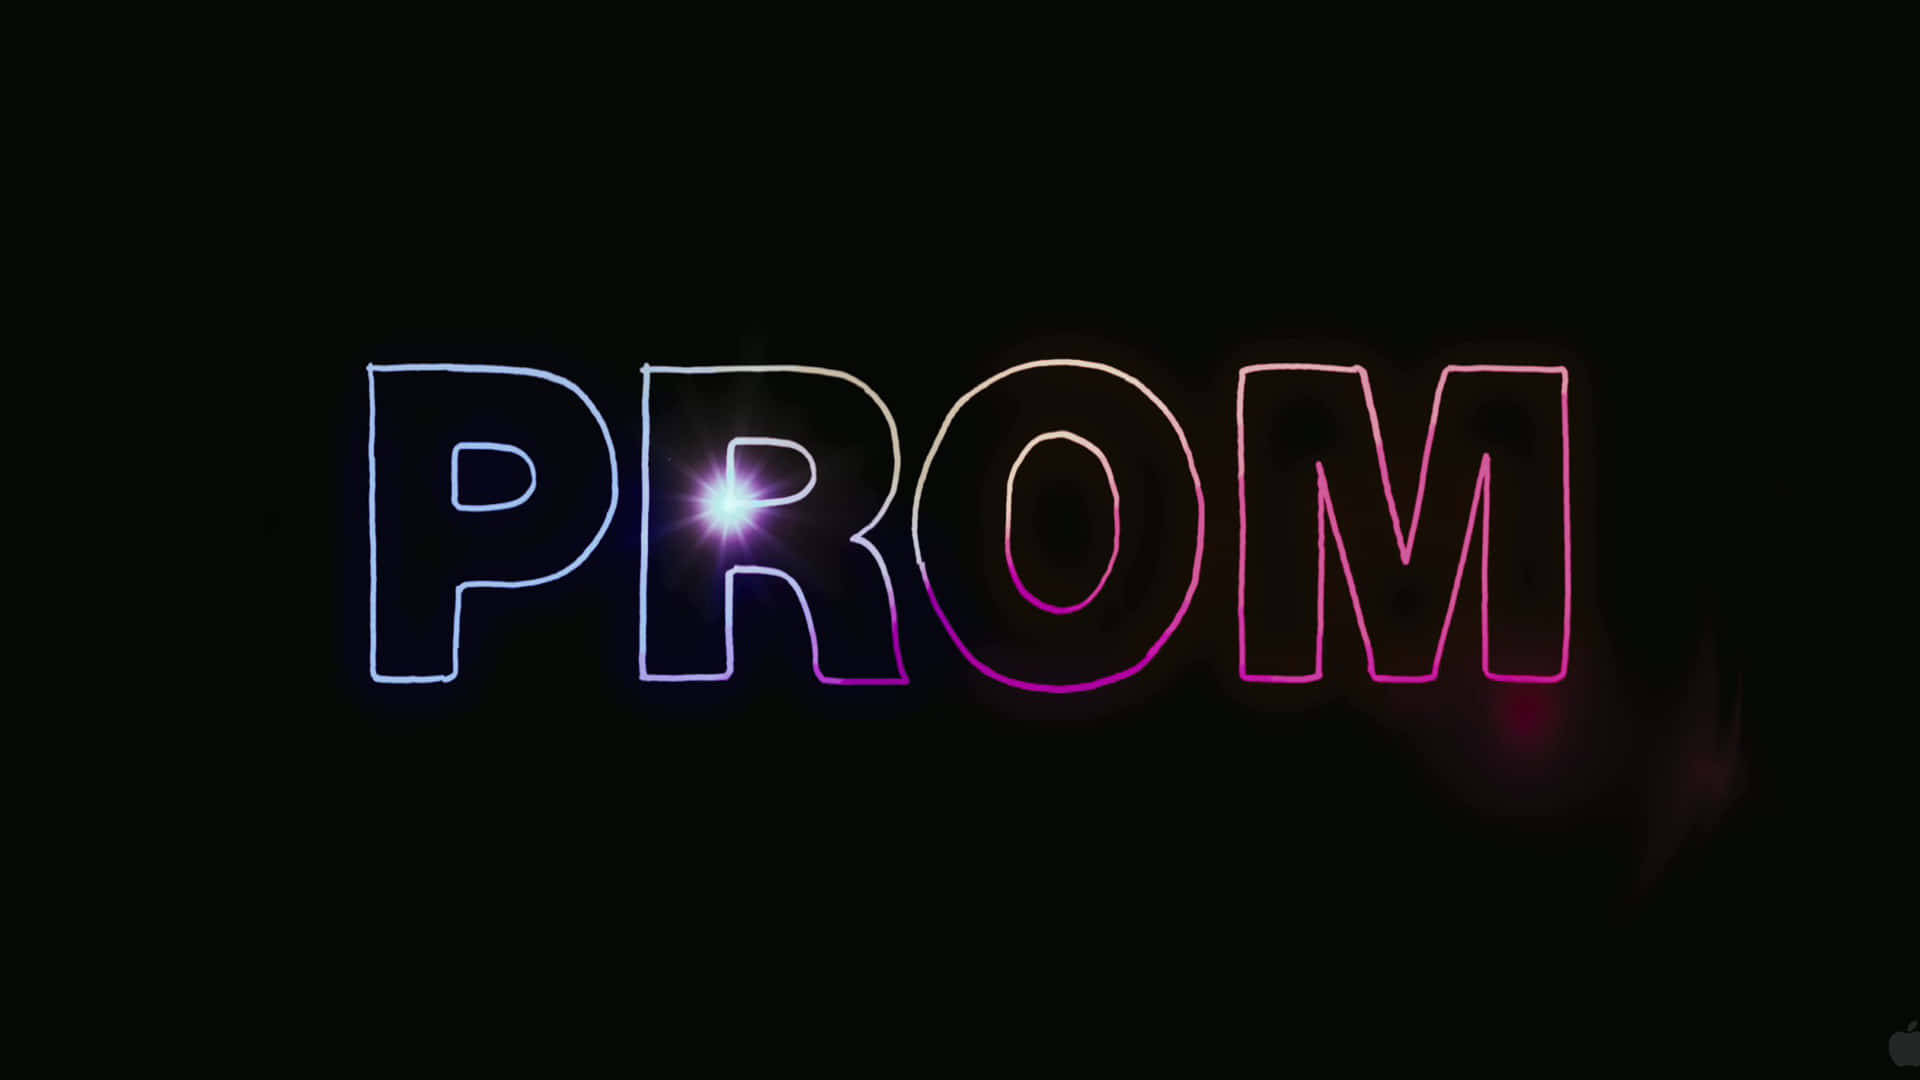 999 Prom Pictures  Download Free Images on Unsplash